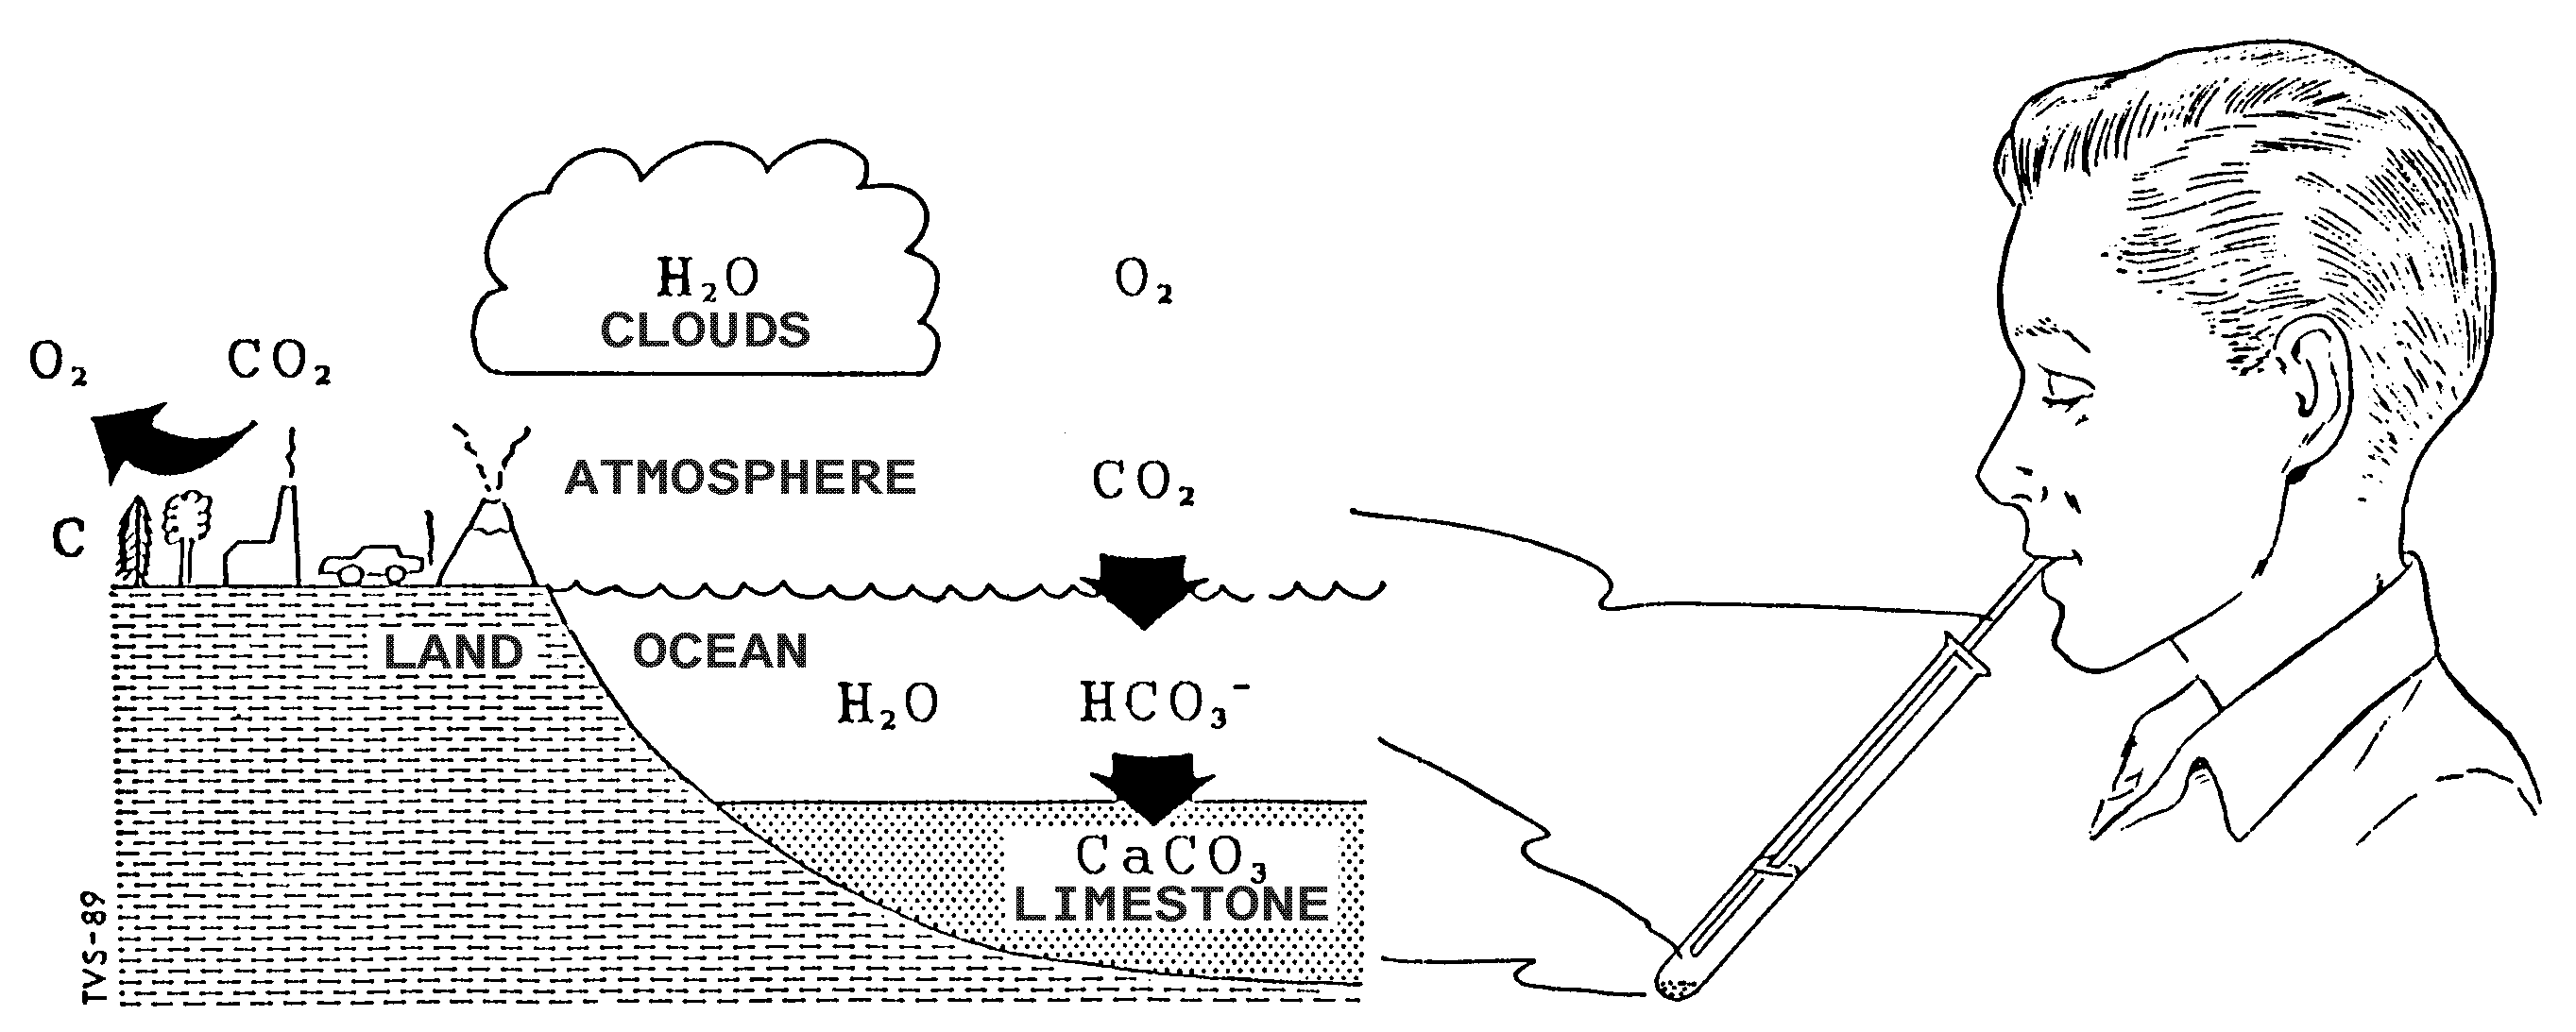 The atmosphere - ocean - limestone system is analogous to breathing CO2 into lime water precipitating solid calcium carbonate.
Download my Aftenposten chronicle [in Norwegian] (PDF; 242 kbytes).